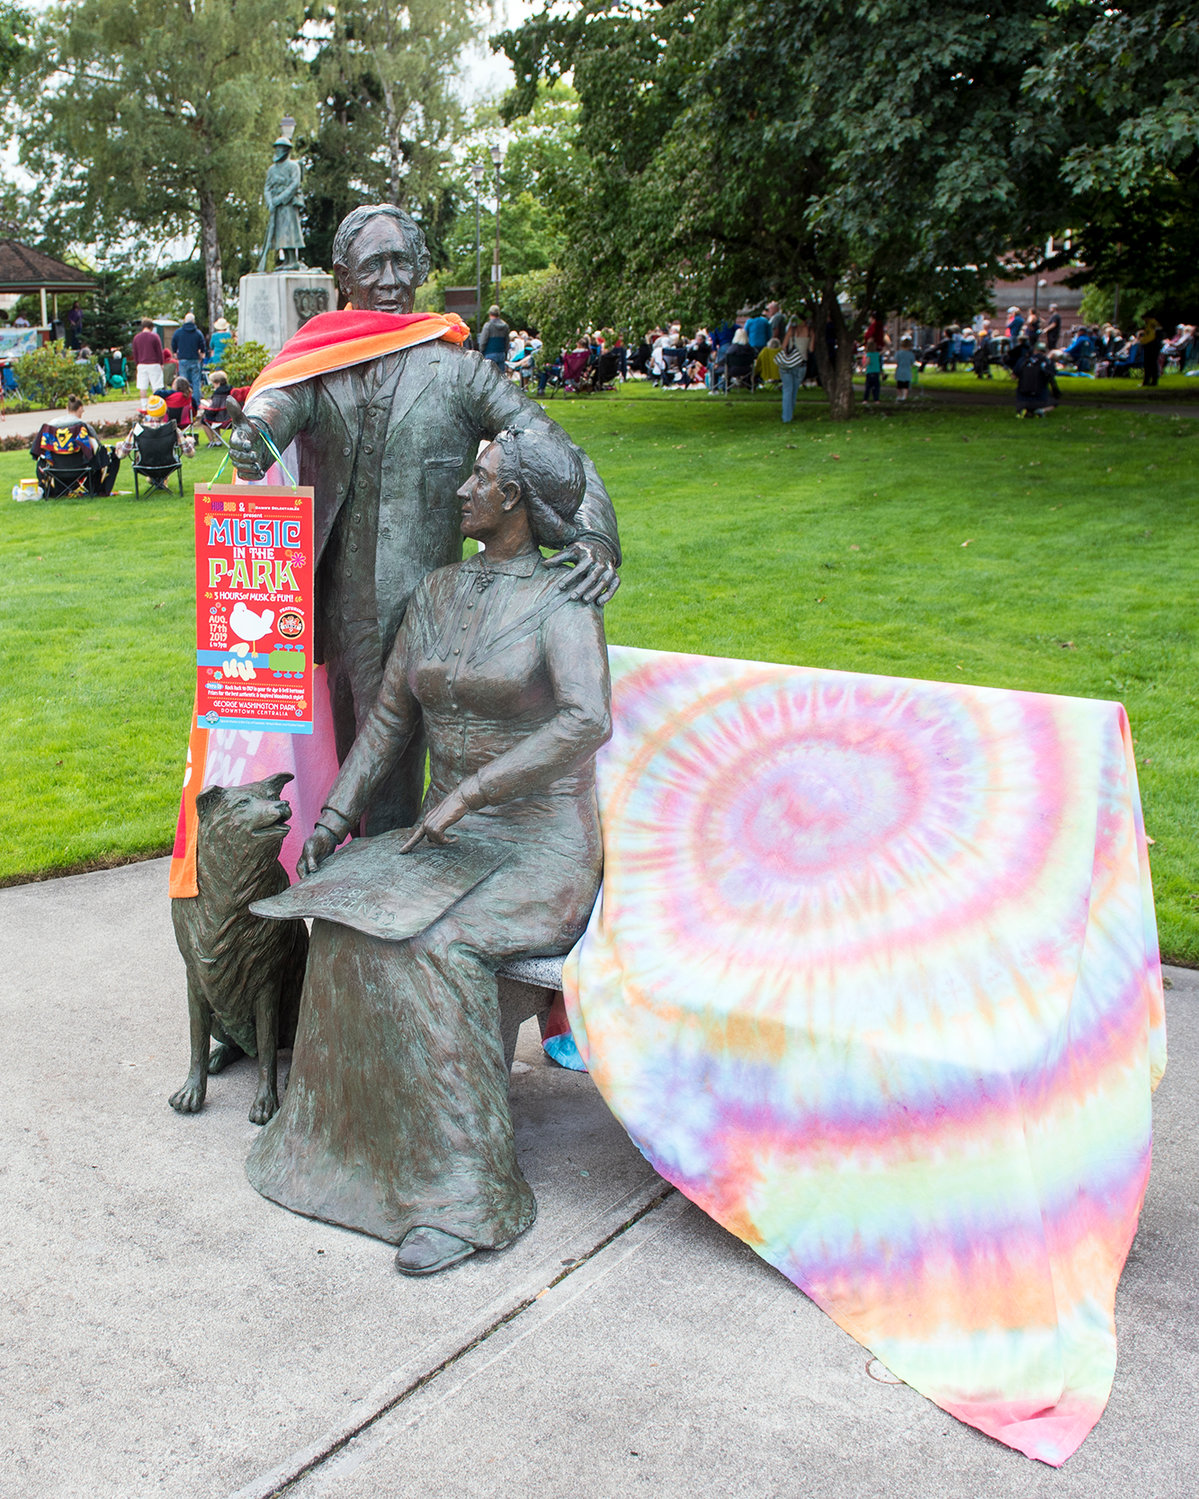 The statue of George and Mary Jane Washington sported the appropriate attire Saturday for a Woodstock-themed Music in the Park in downtown Centralia.